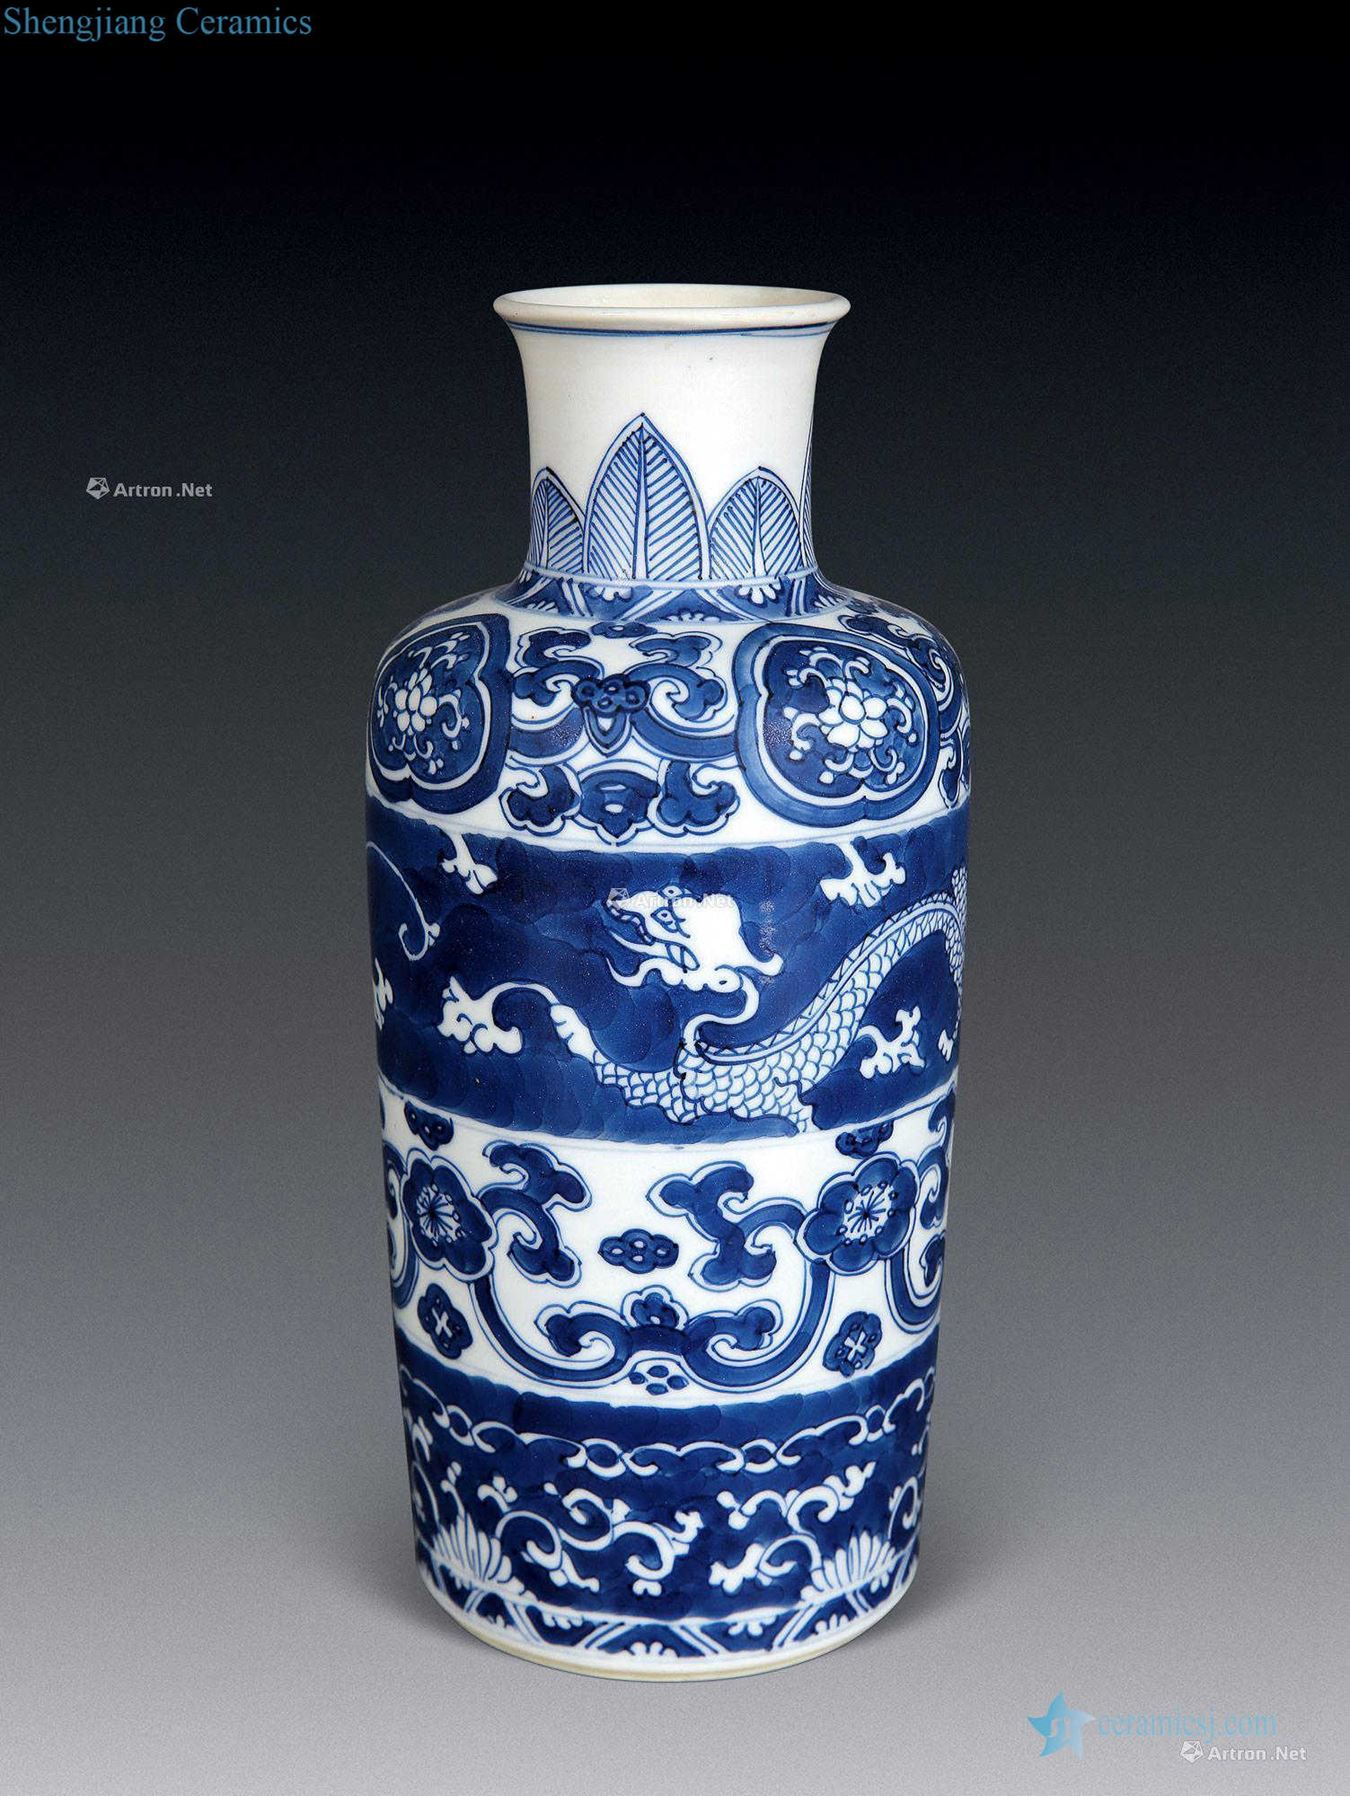 In the qing dynasty blue and white pattern